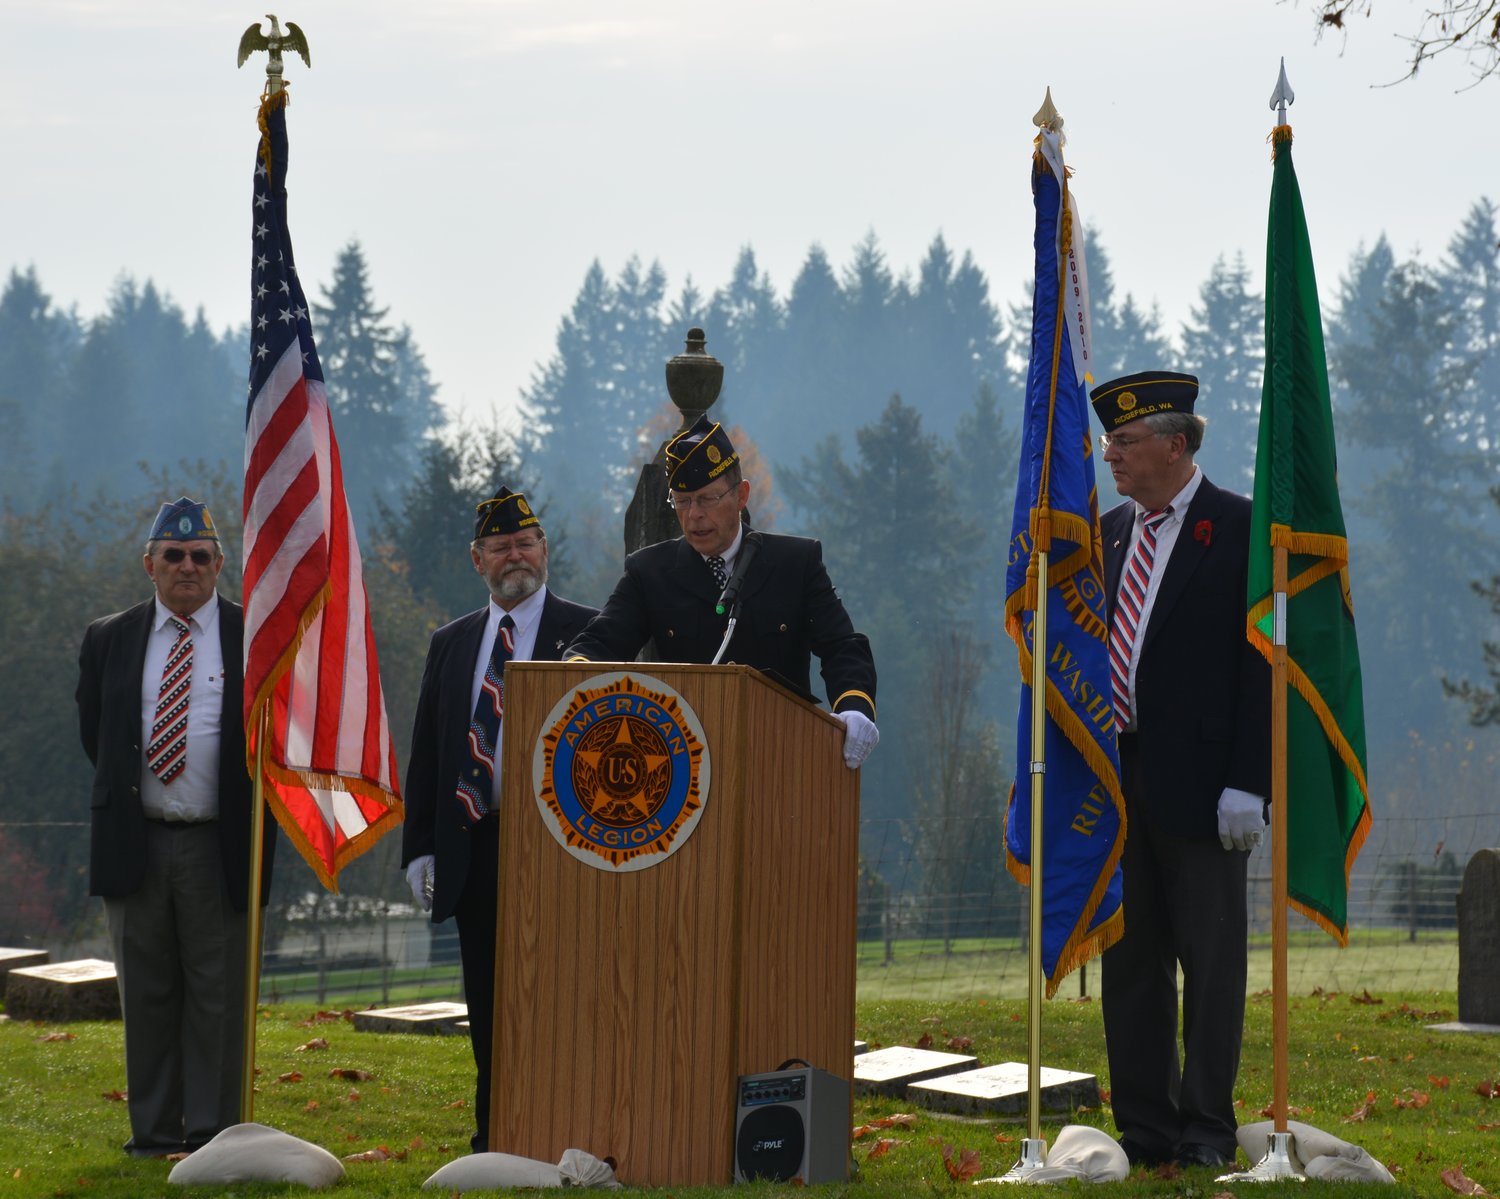 Members of the American Legion address a crowd gathered at a flagpole dedication ceremony at Sara Union Cemetery near Ridgefield on Veterans Day 2016.